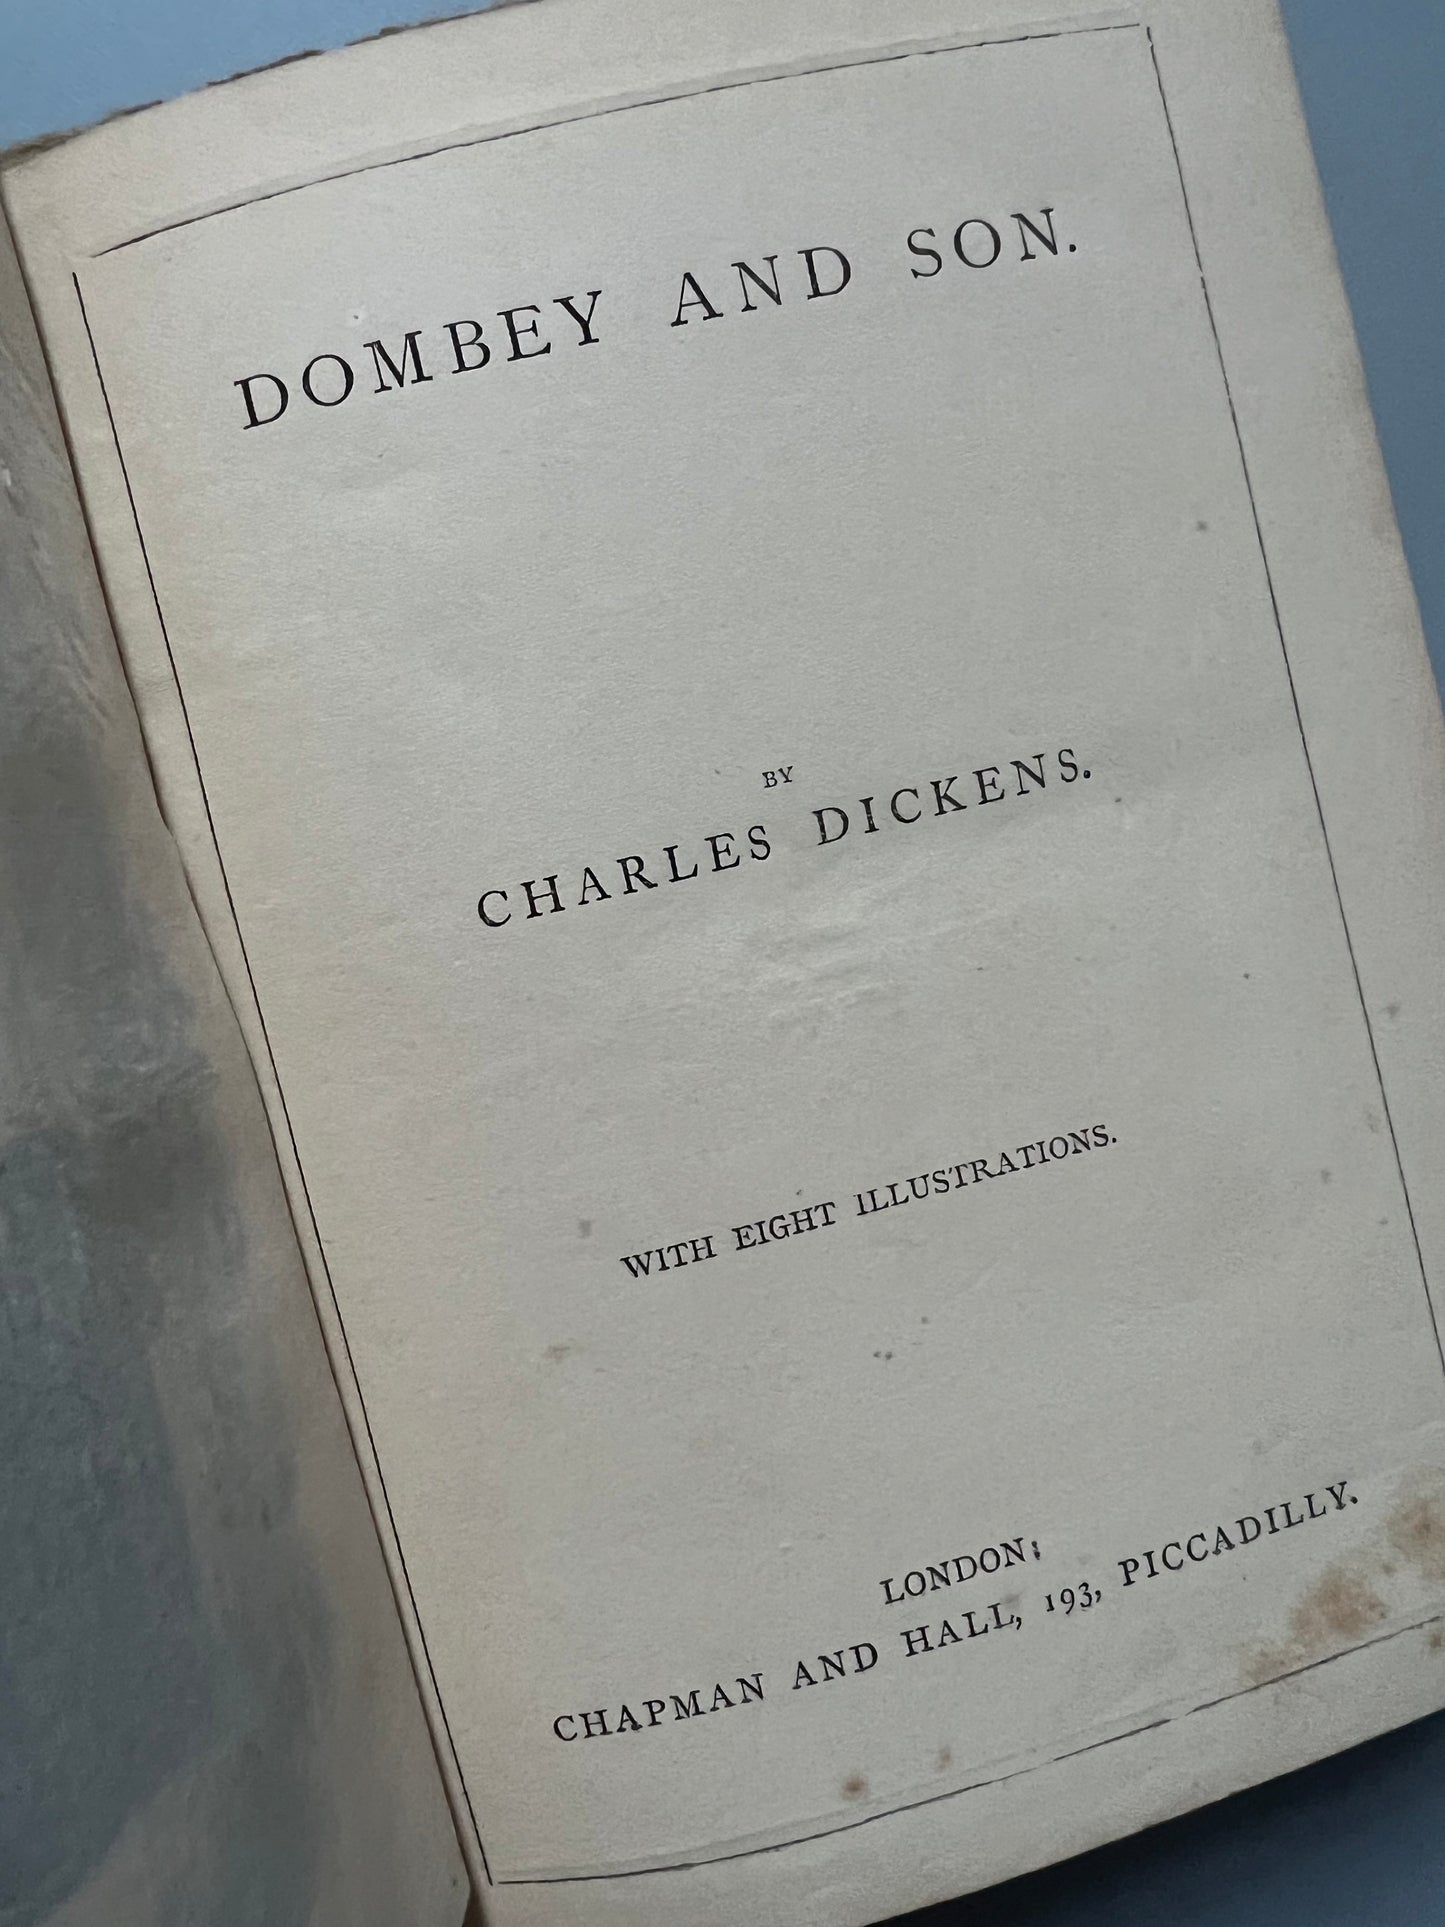 Dombey and son, Charles Dickens. The Charles Dickens edition - Chapman and Hall, ca. 1900